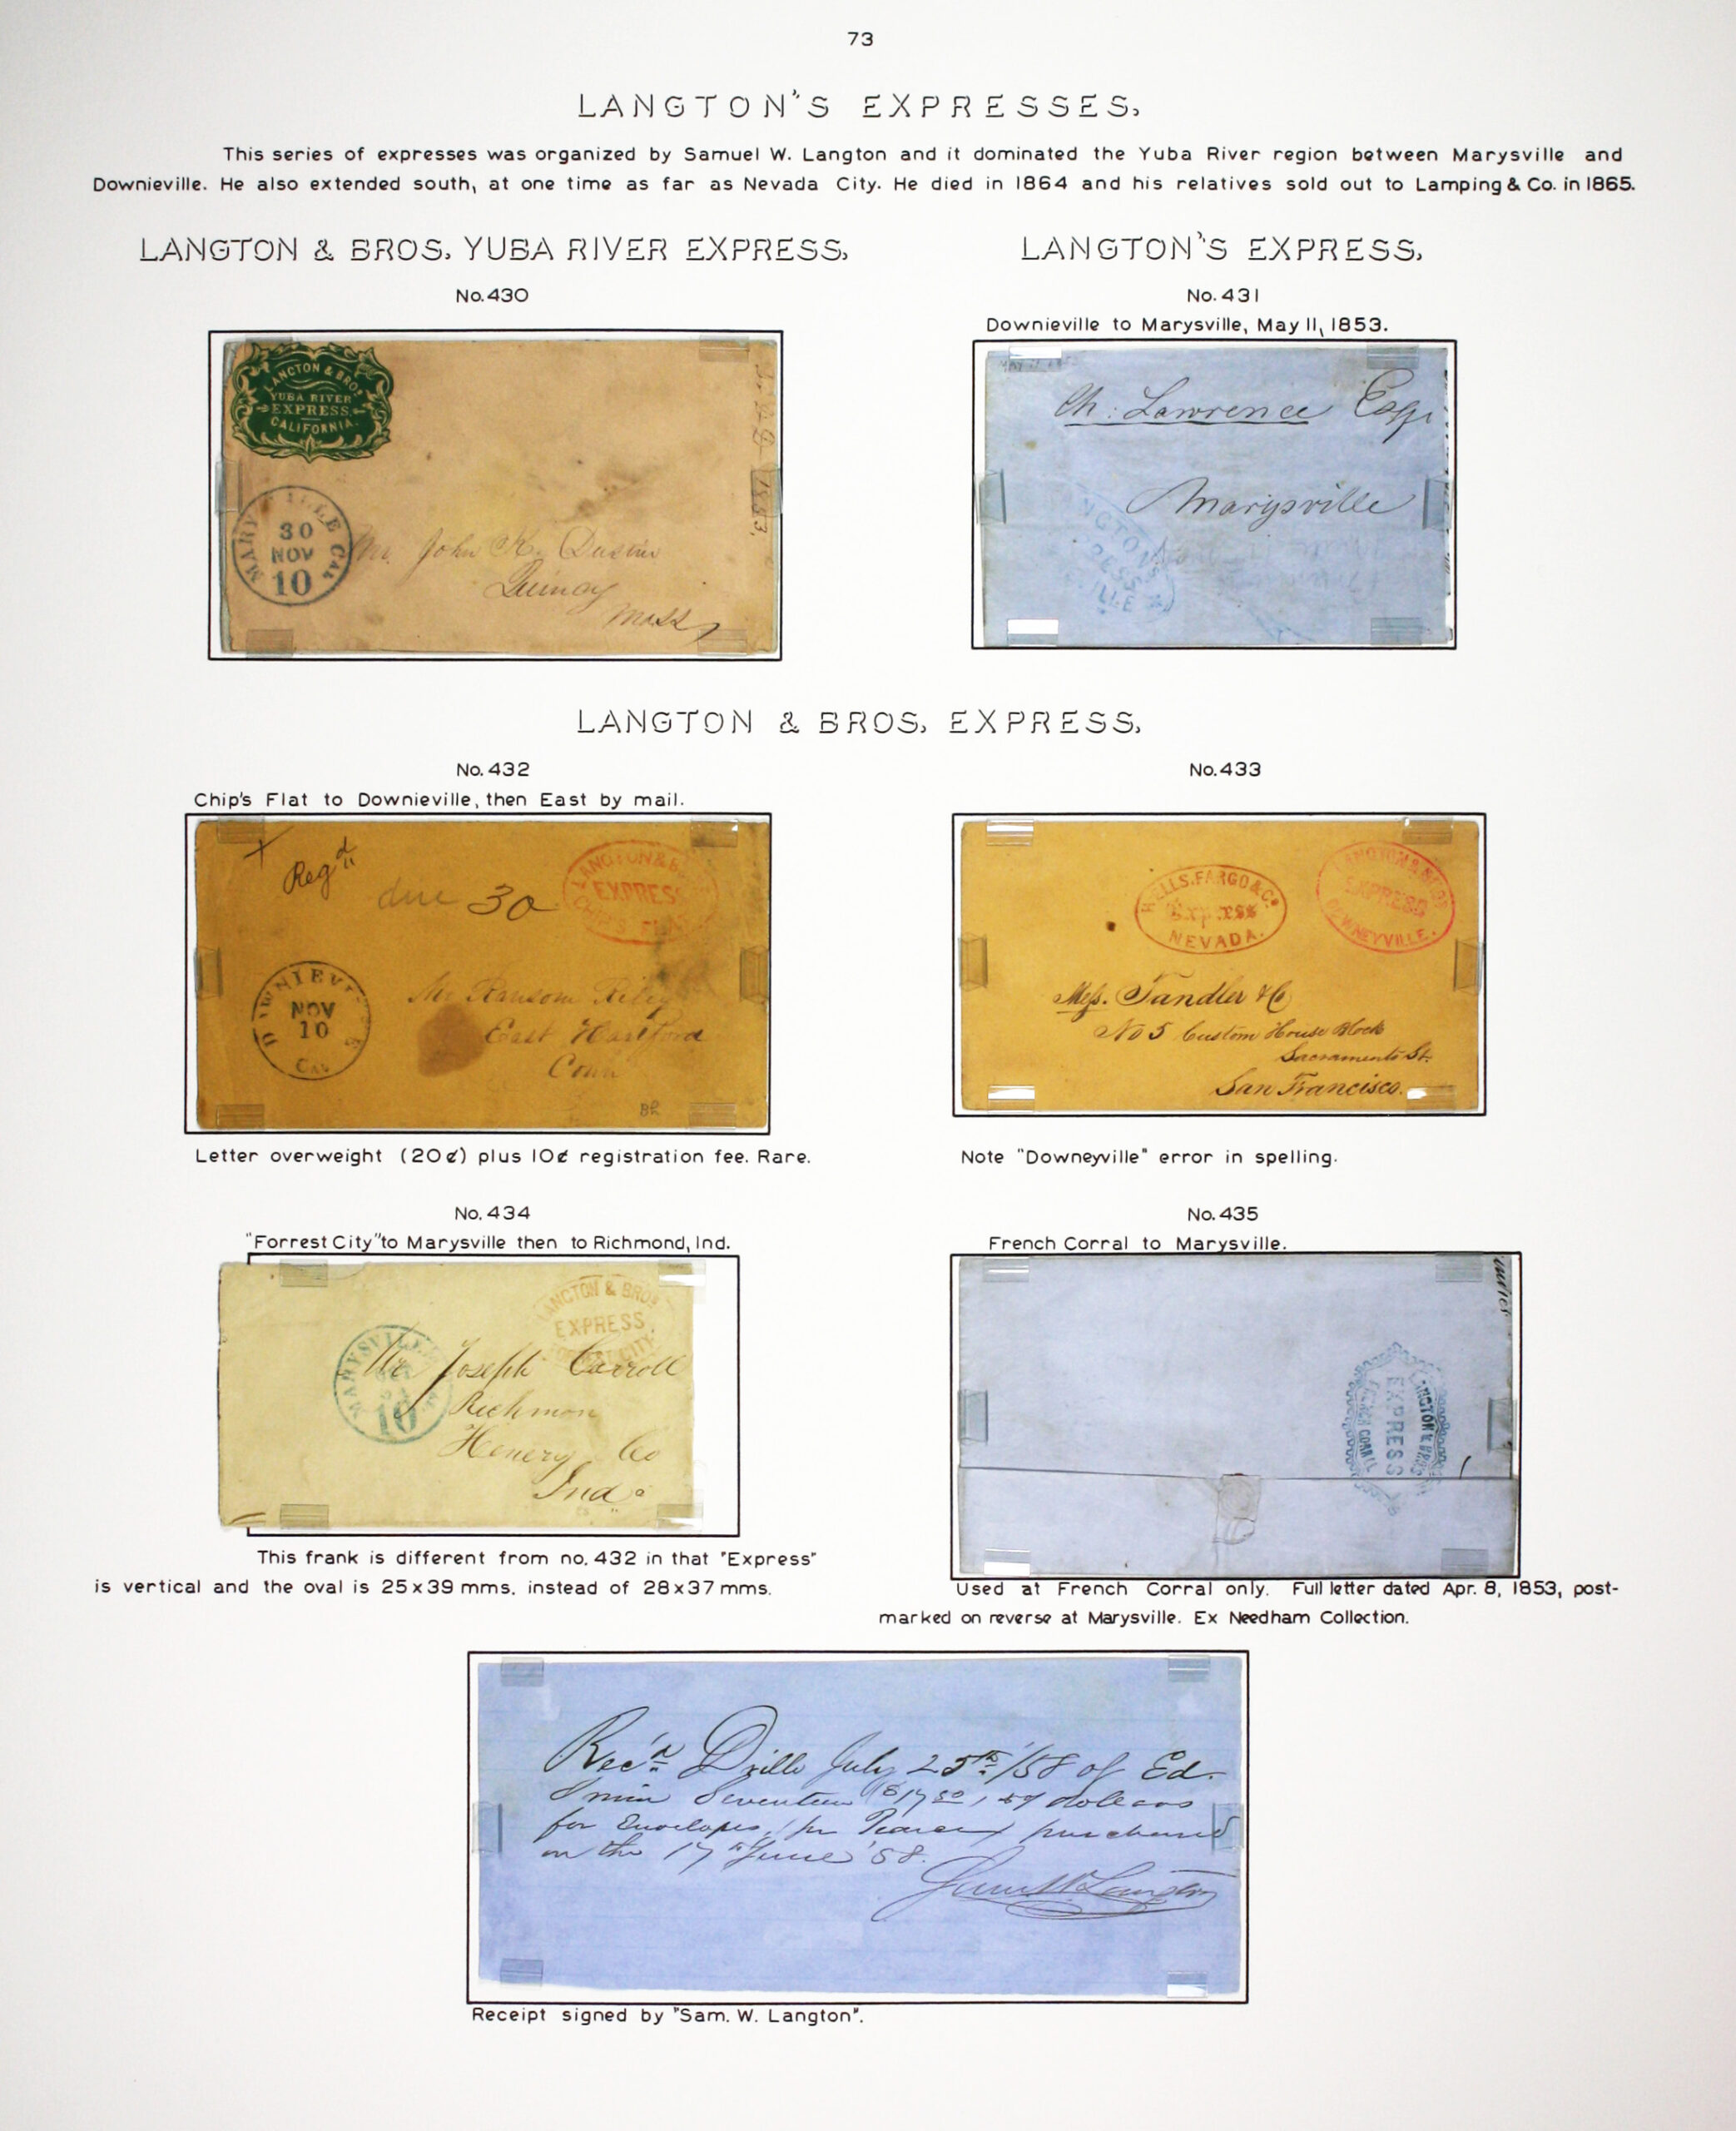 Historic exhibit Panel #73 featuring letter covers and a receipt. Long descriptions are available as page content. Image link will enlarge image.